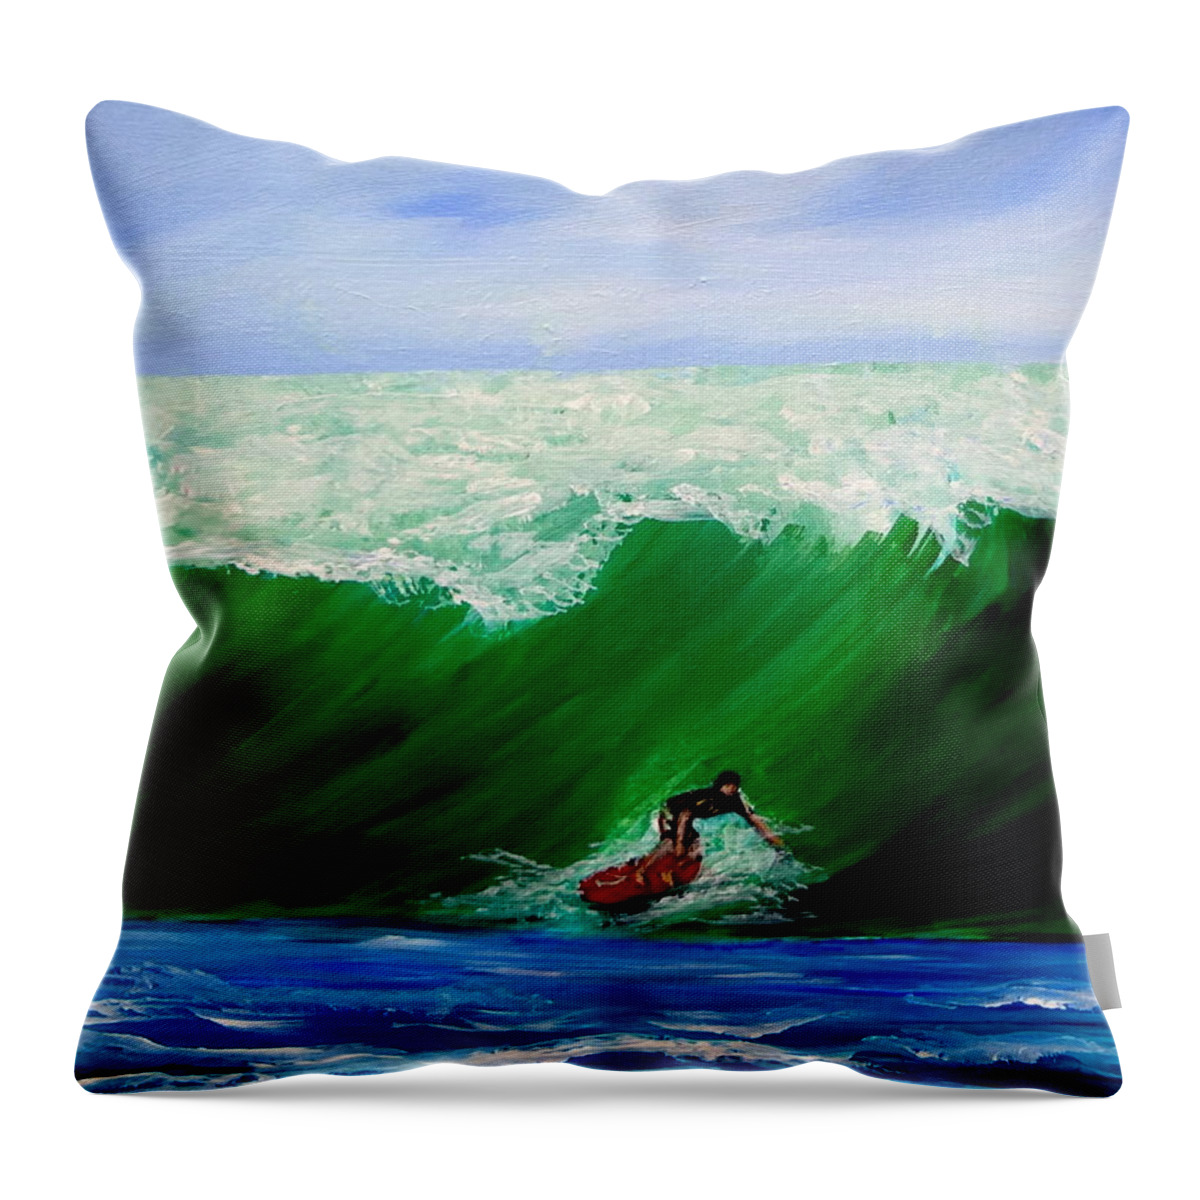 Surfing Throw Pillow featuring the painting Surf's Up Surfing Wave Ocean by Katy Hawk